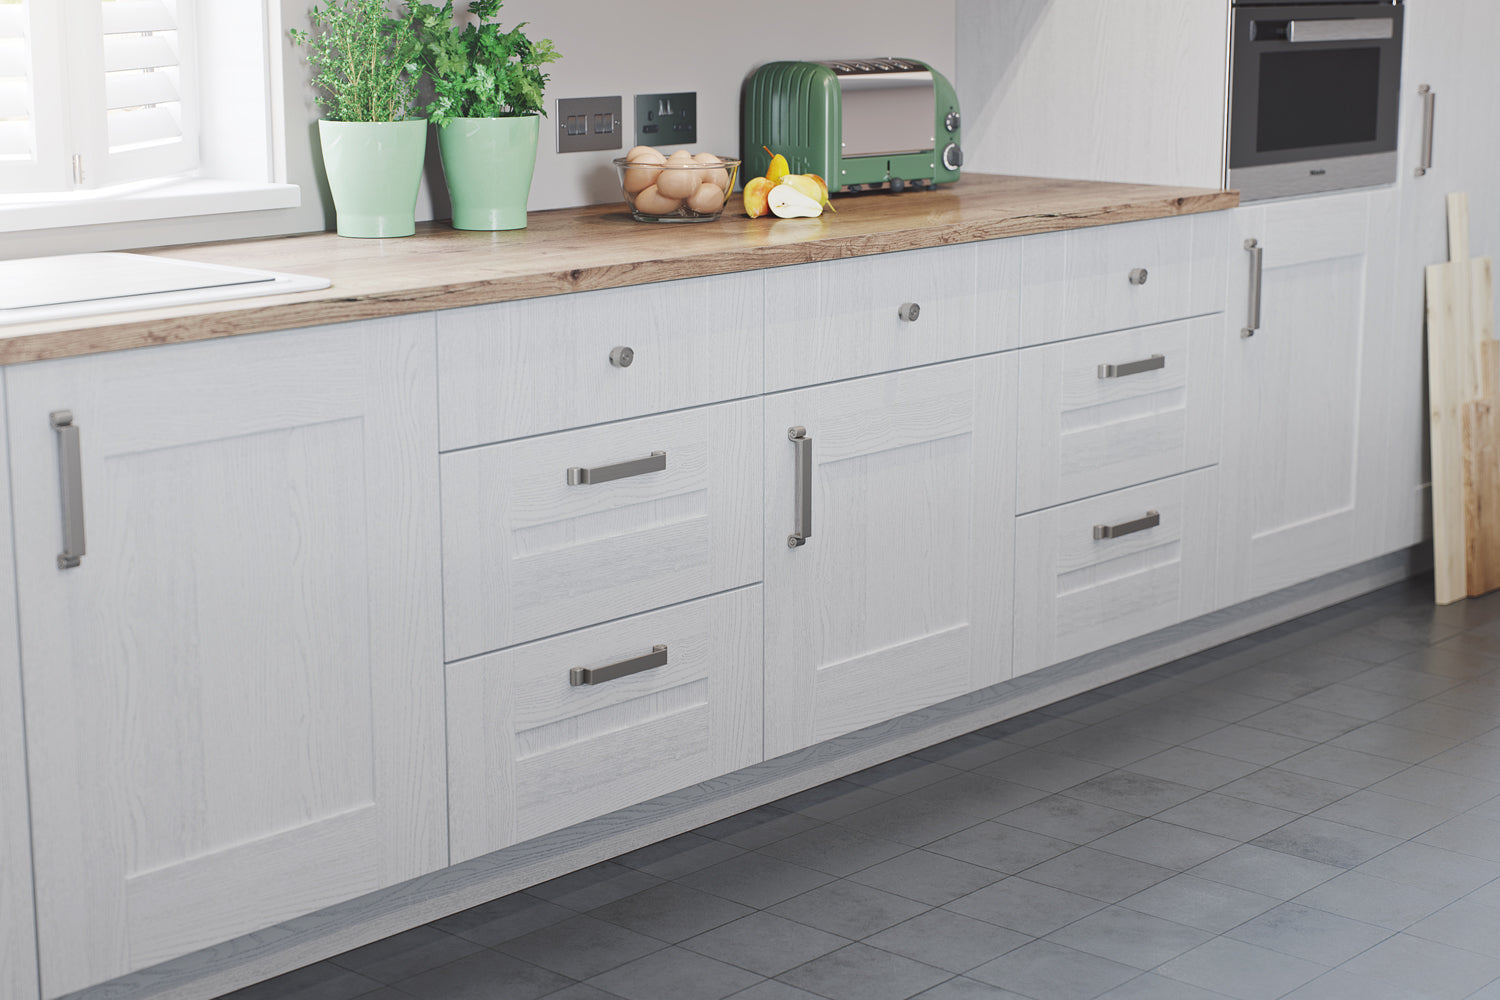 Shaker style doors and drawers in light grey